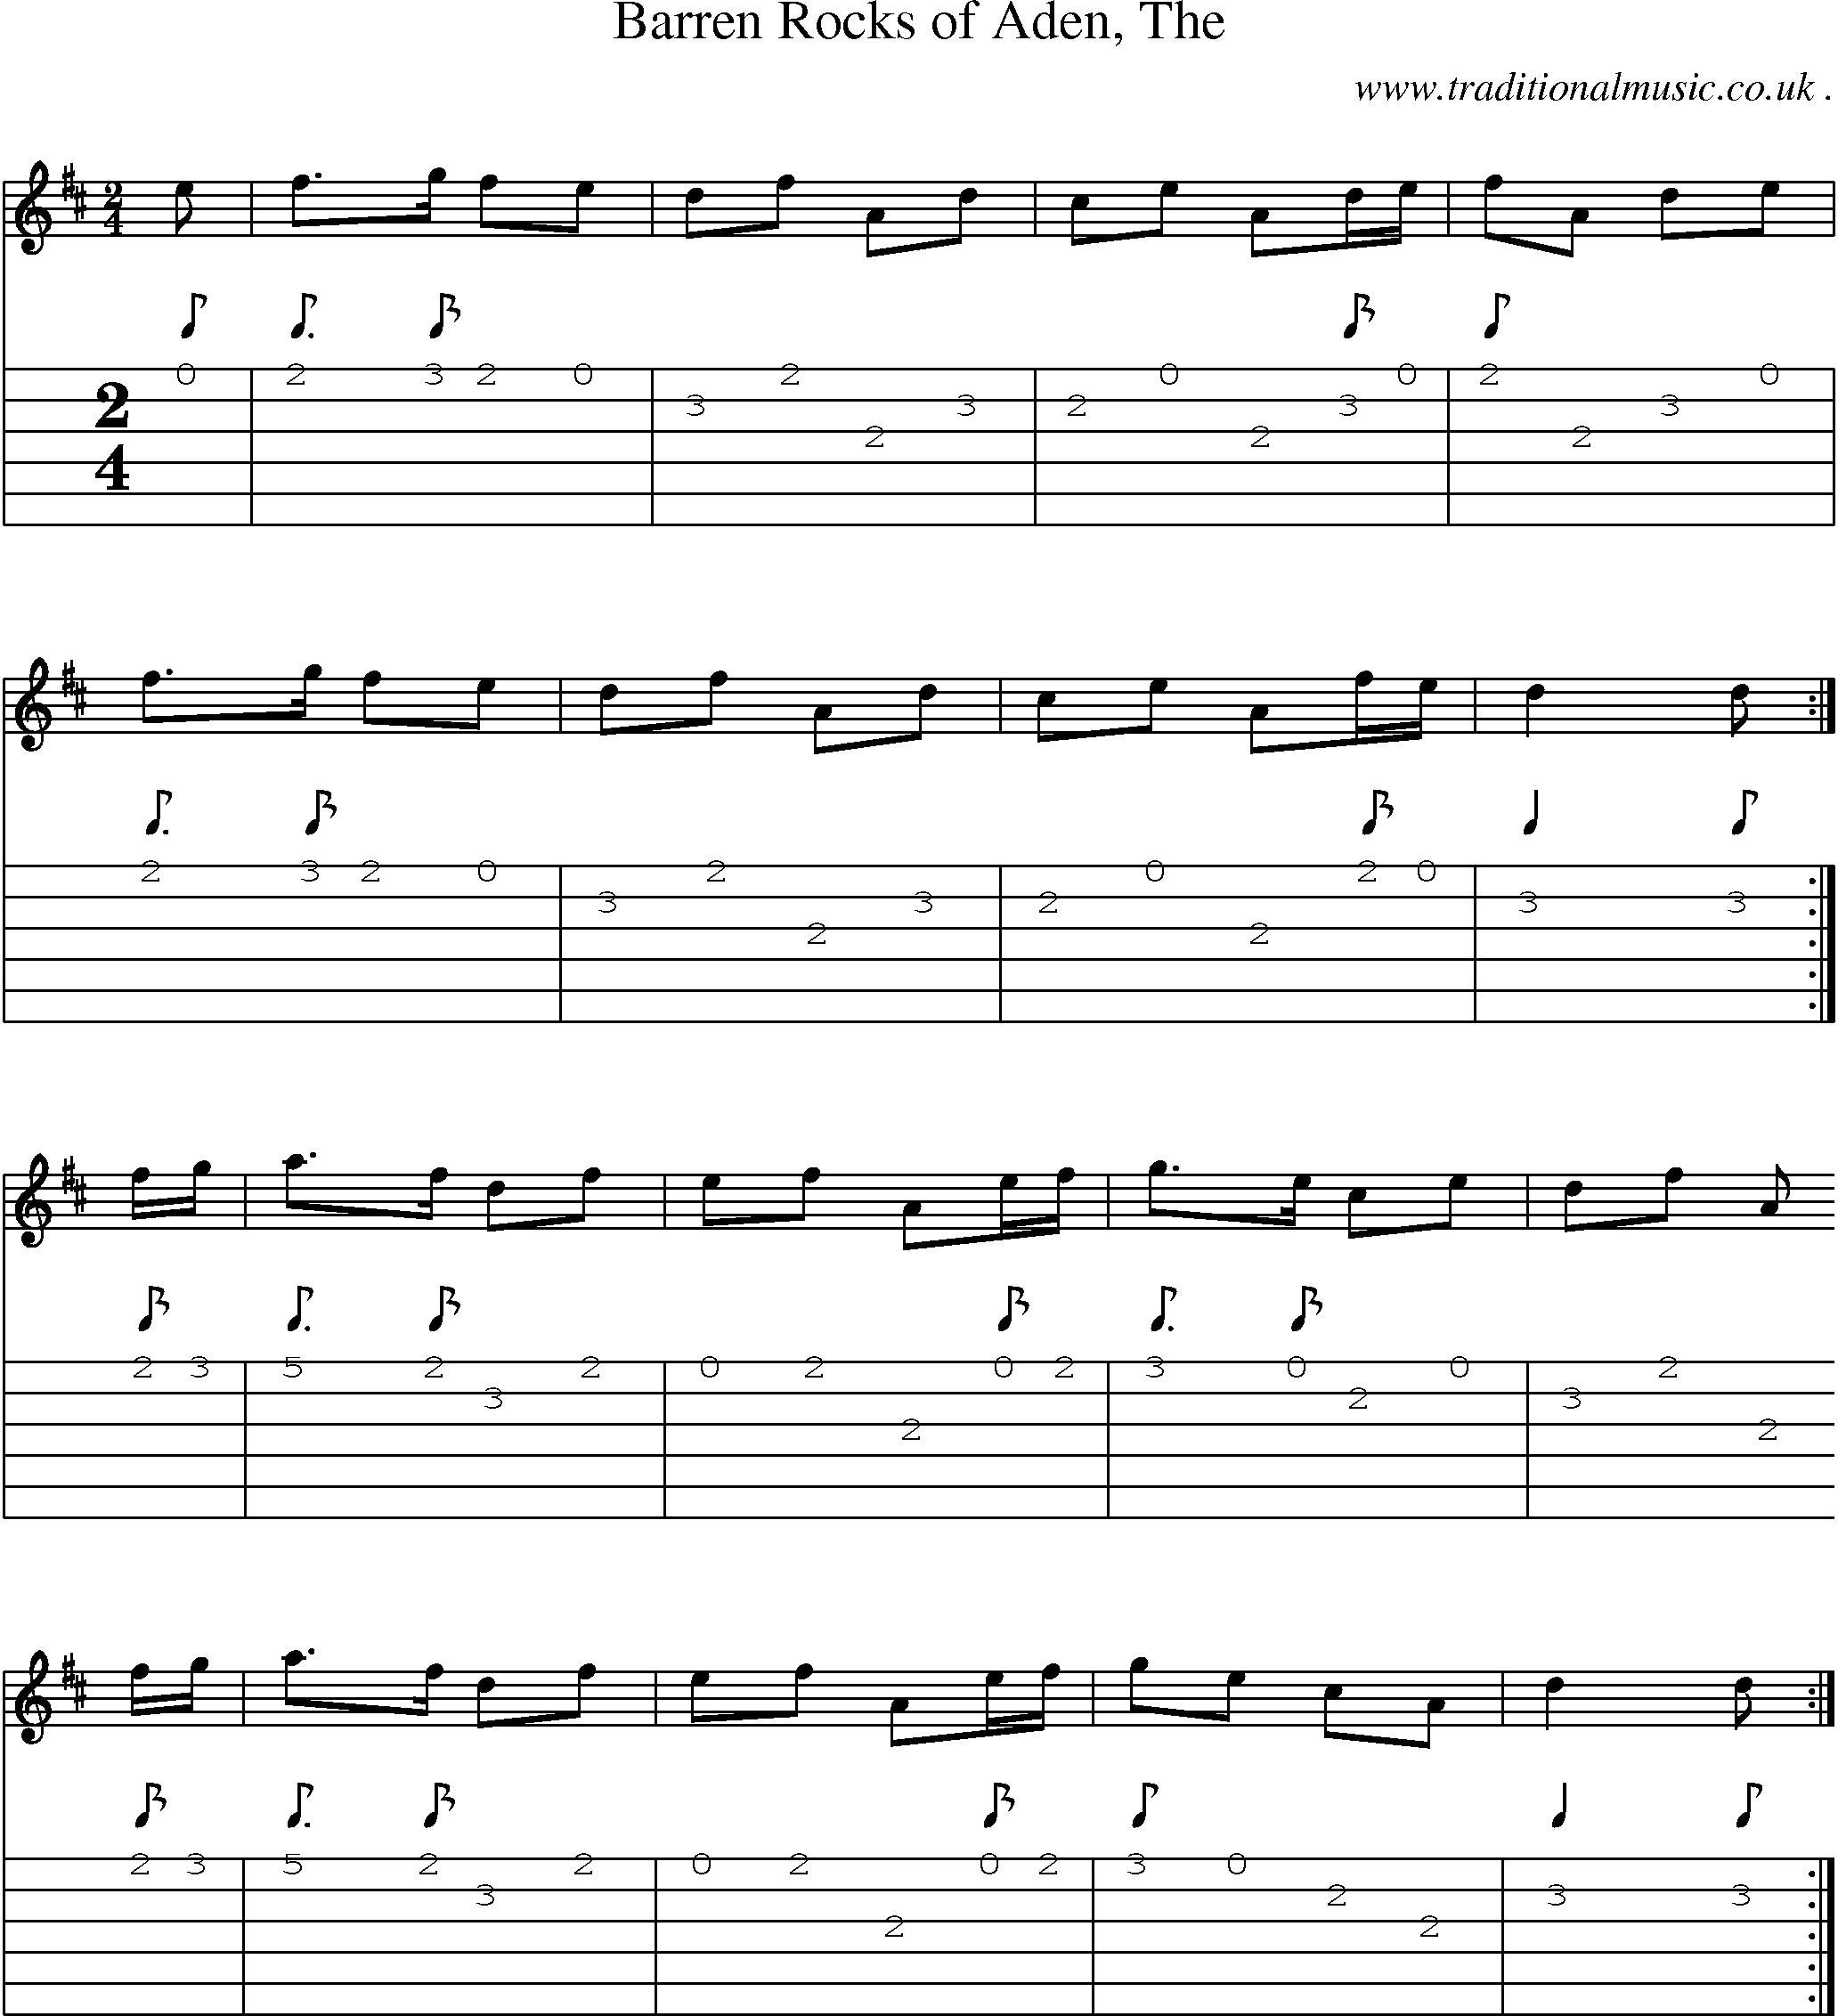 Sheet-music  score, Chords and Guitar Tabs for Barren Rocks Of Aden The